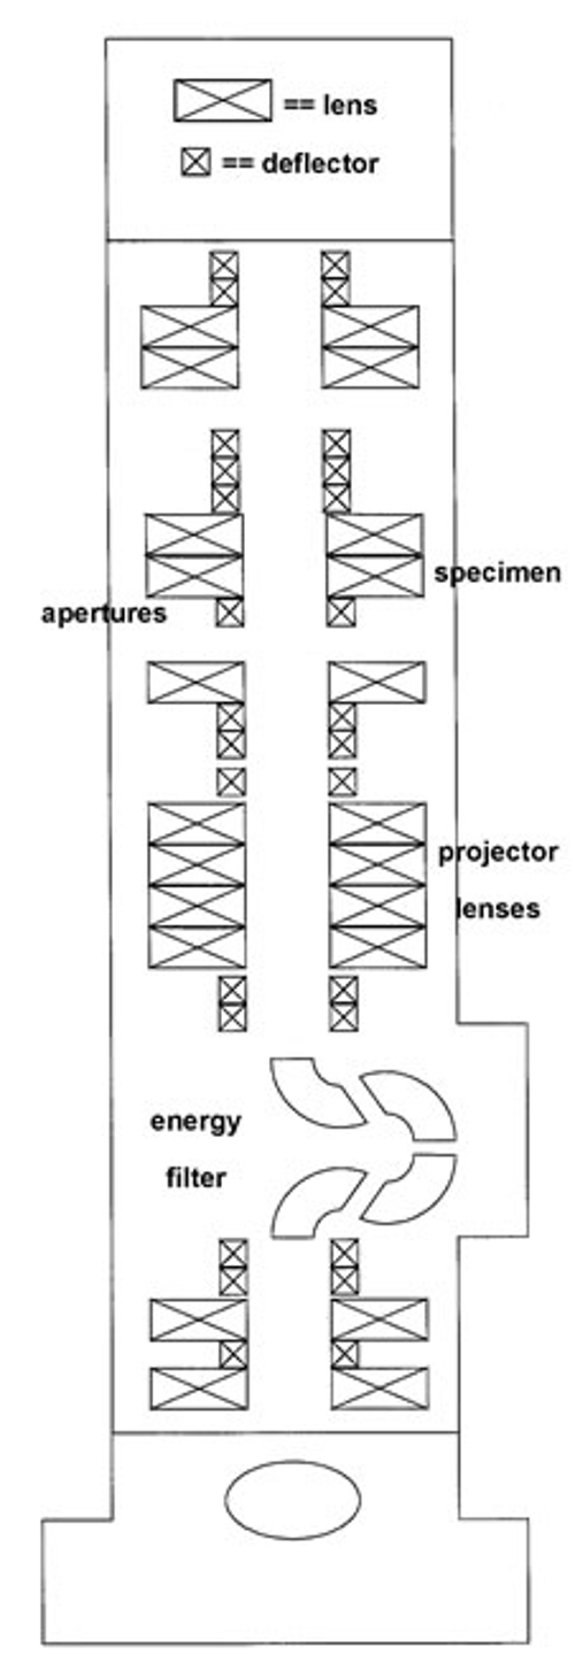 A diagram of an electron microscope displaying the location of the lenses, projector lenses, deflectors, apertures, specimen, and energy filter.